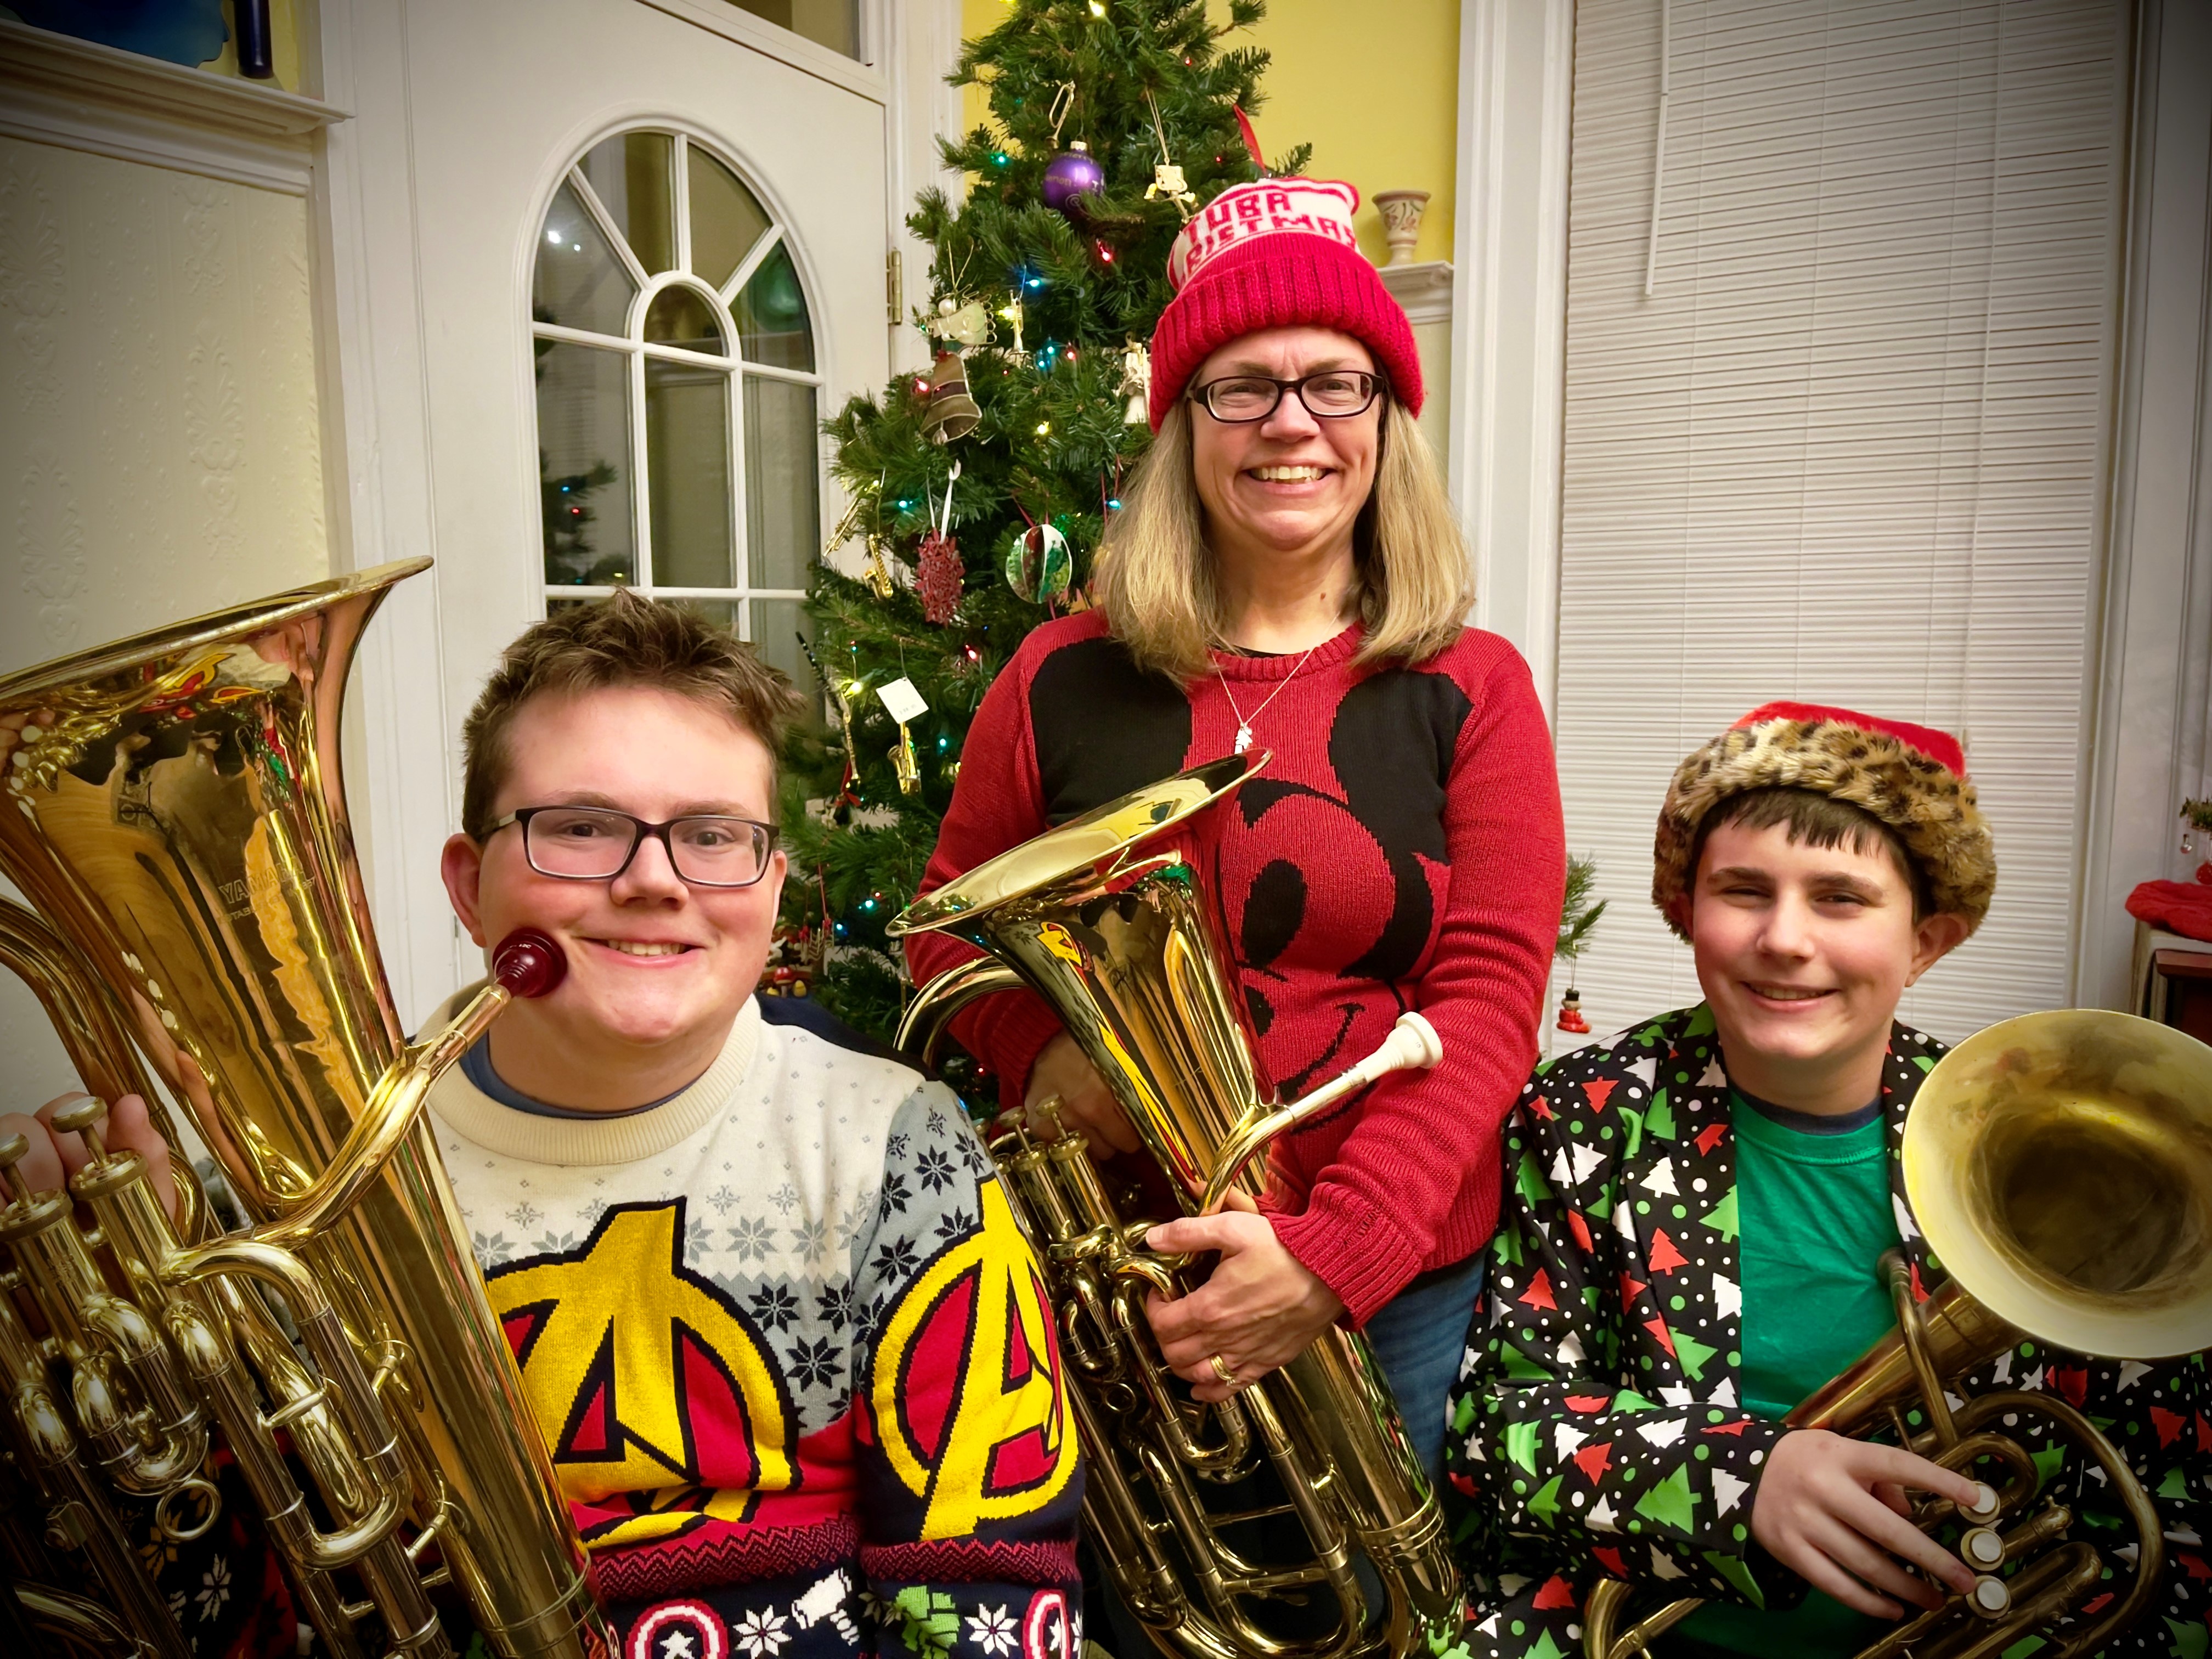 It's beginning to look a lot like  TubaChristmas?